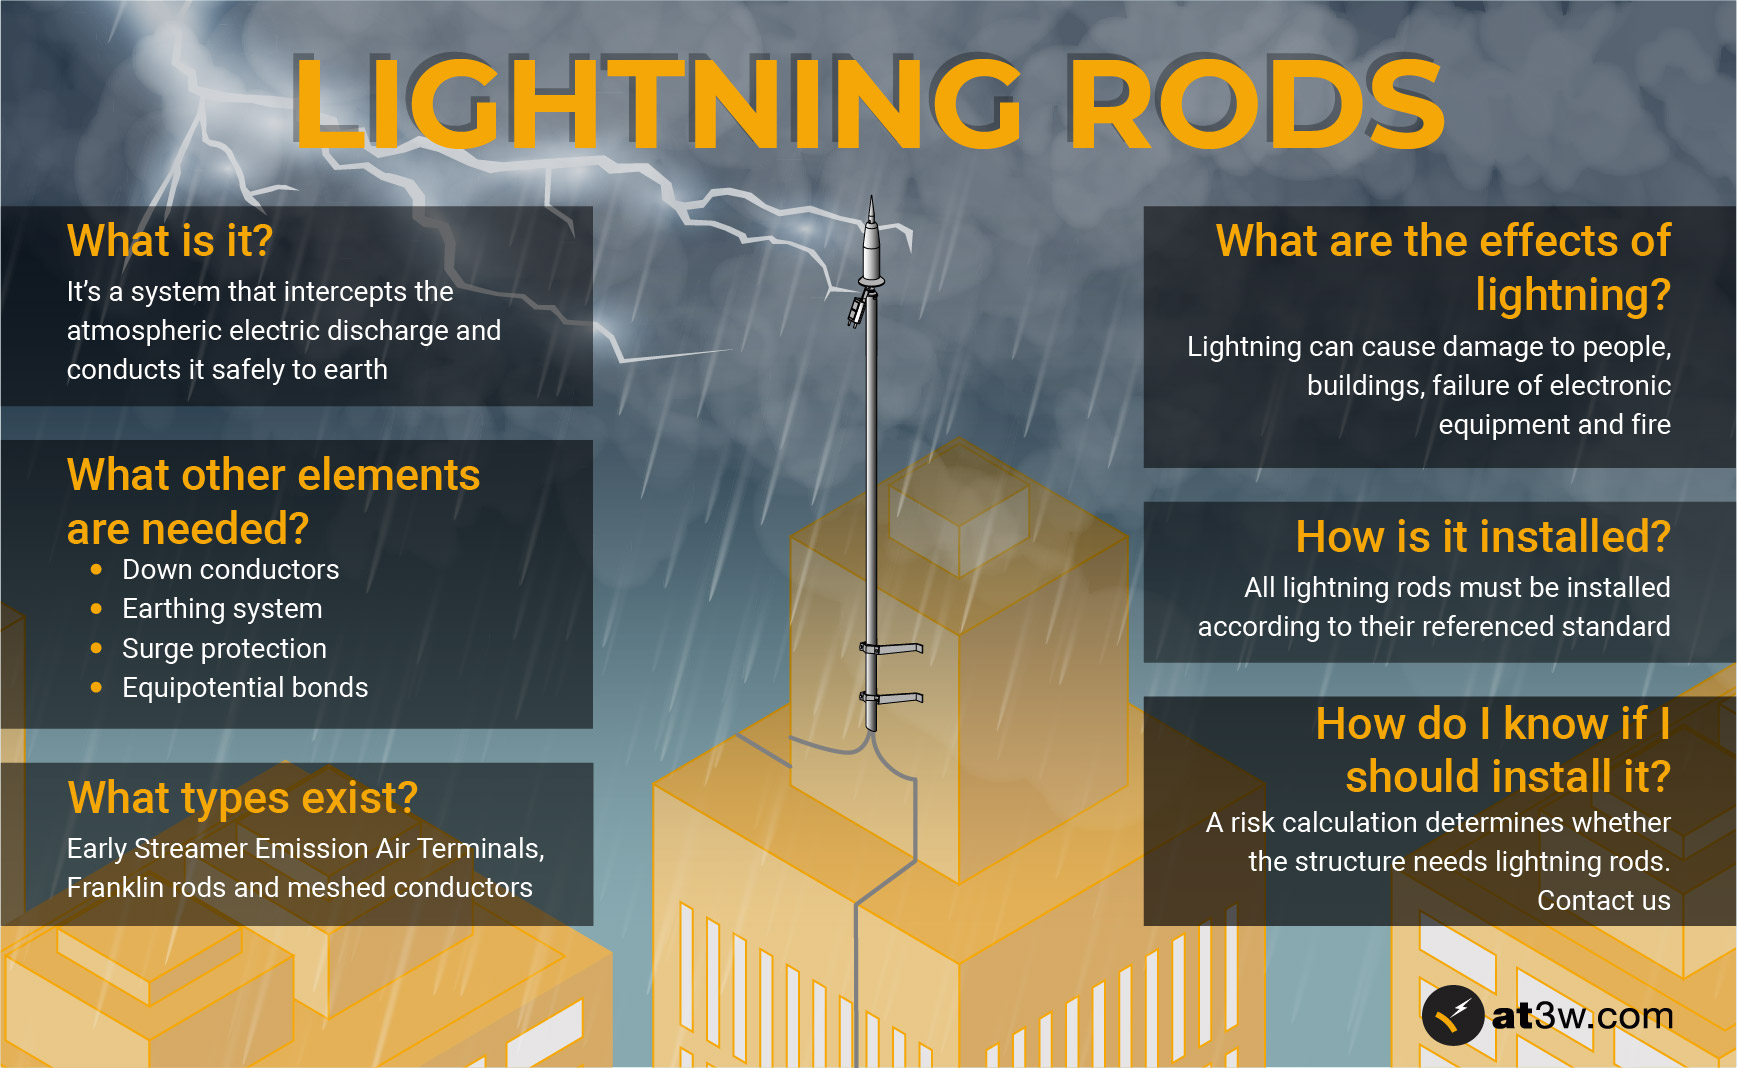 What is a lightning rod?